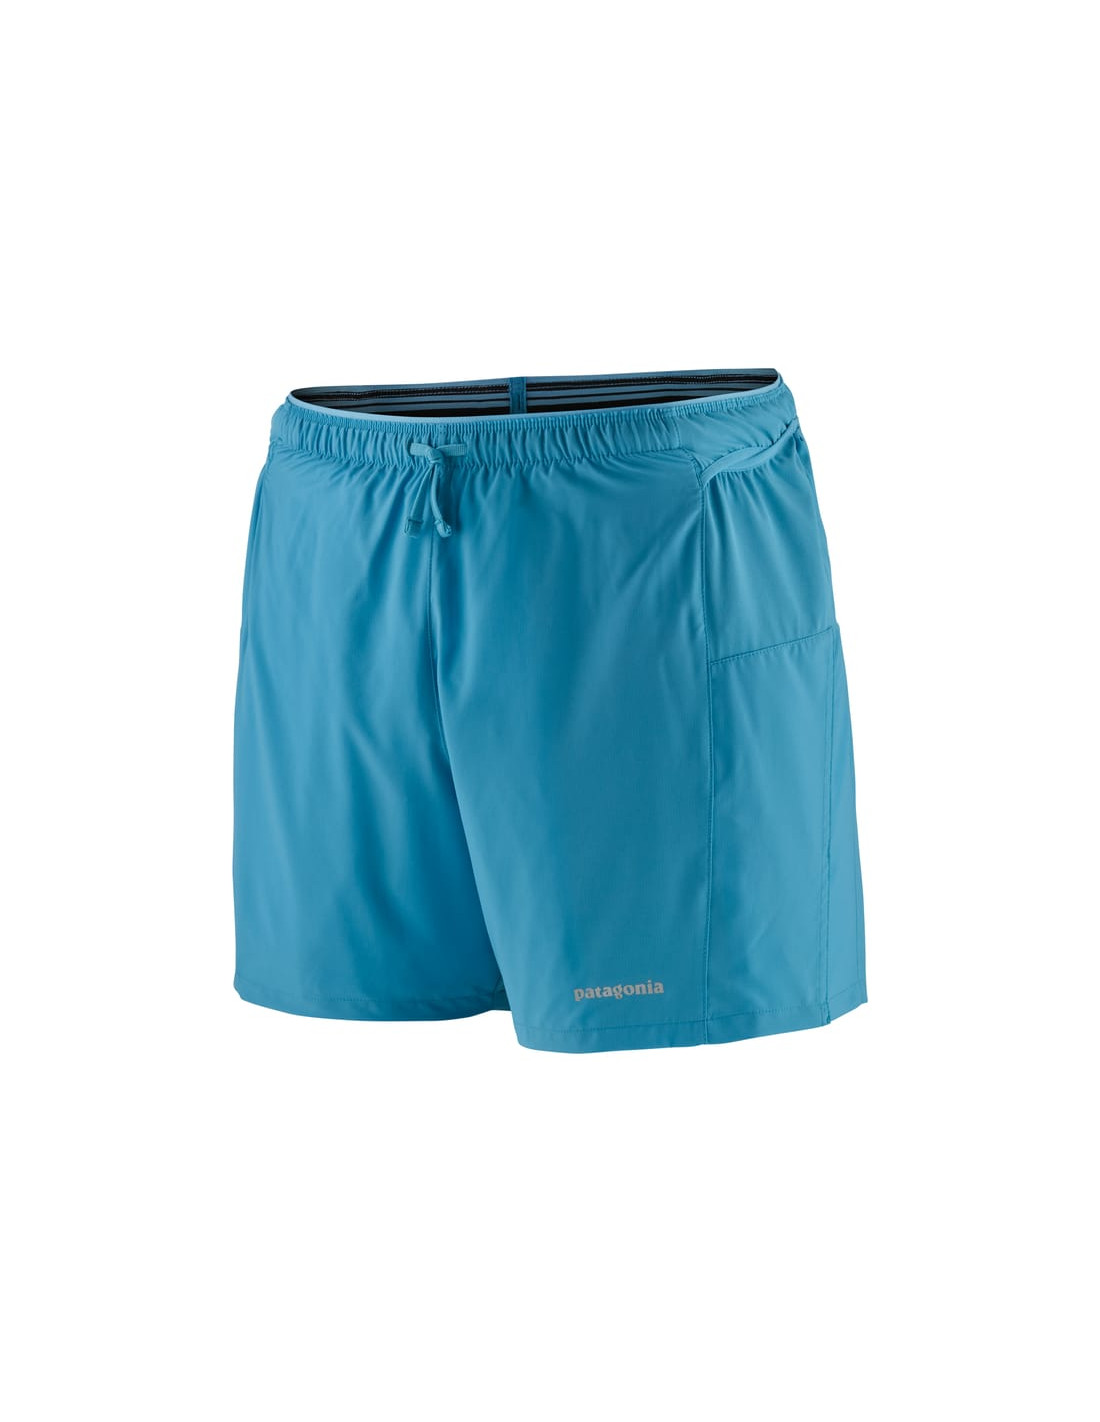 M'S STRIDER PRO SHORTS - 5 IN.